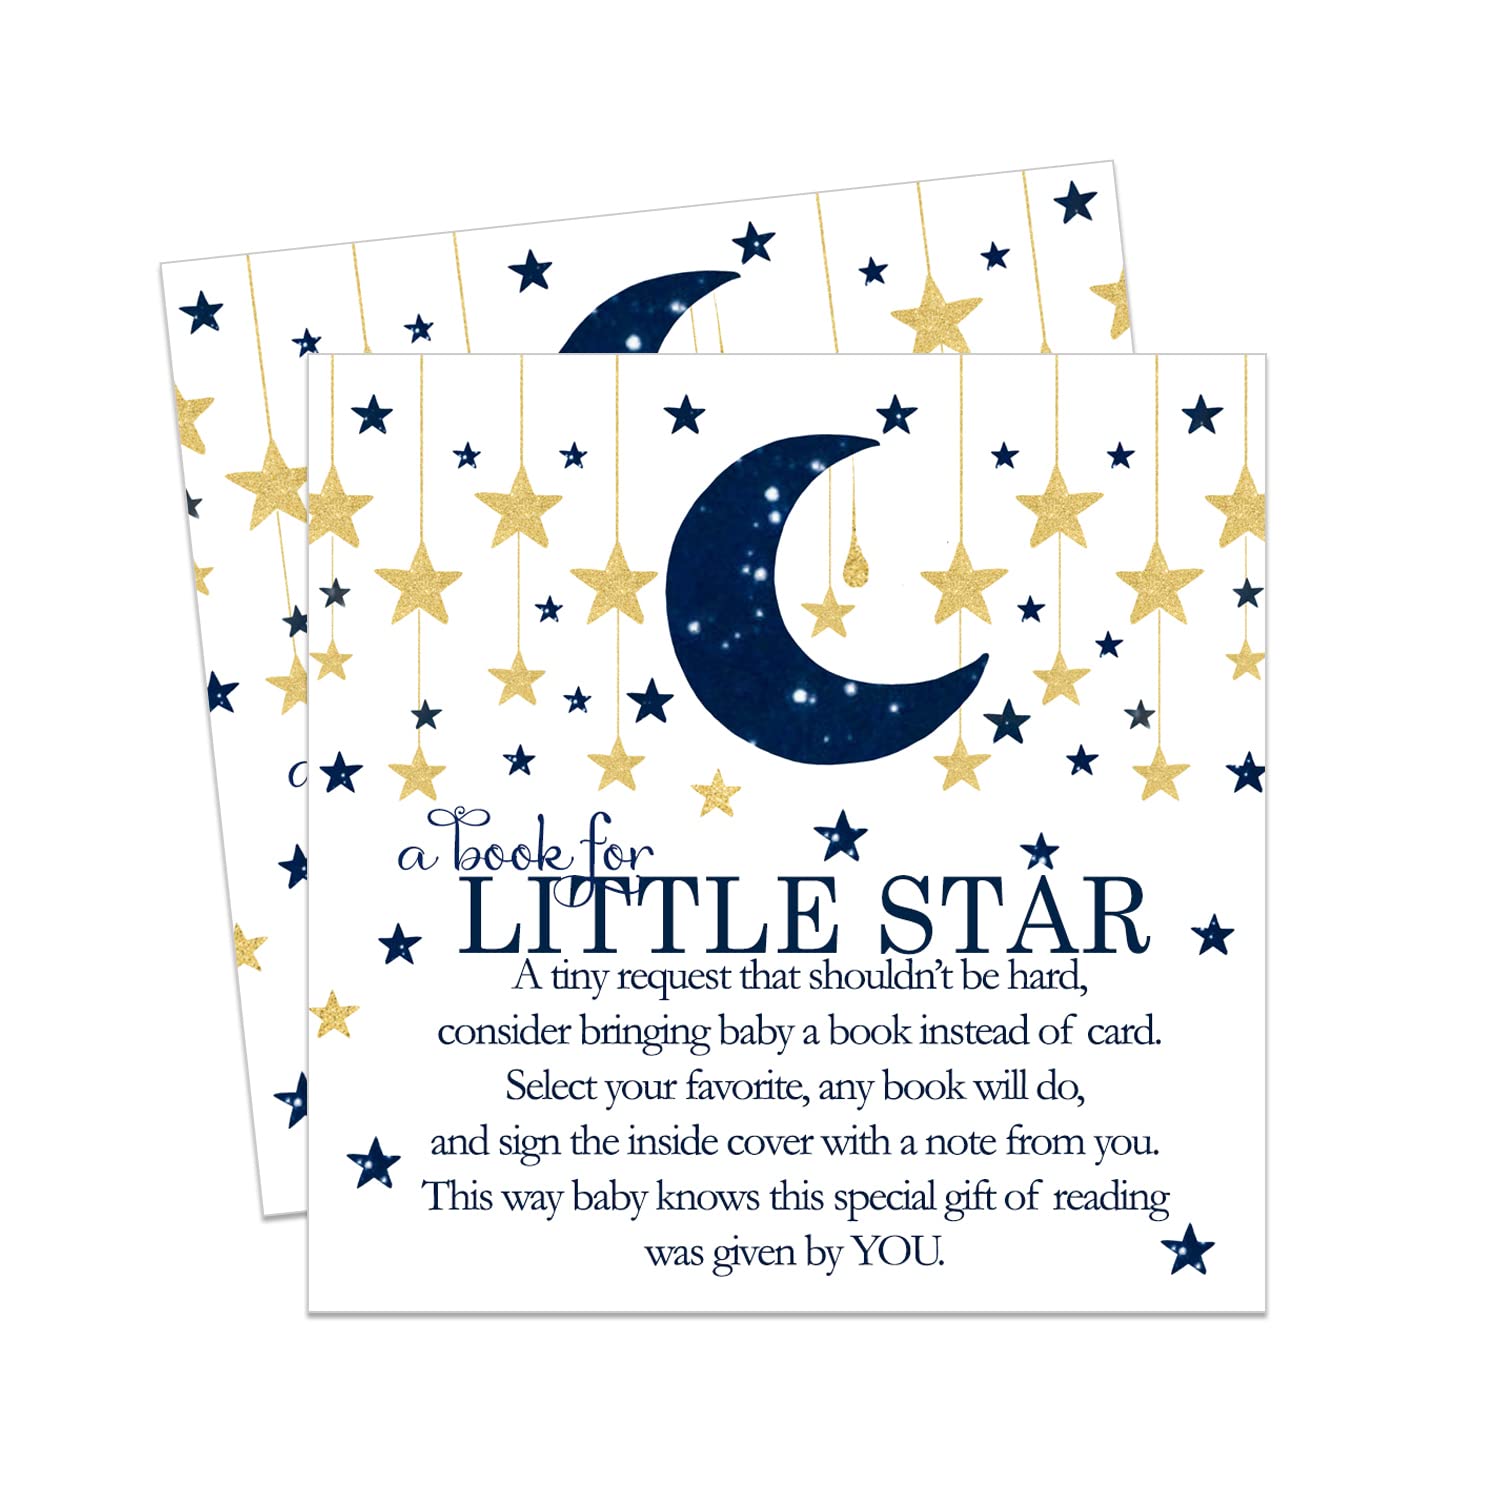 Paper Clever Party Twinkle Little Star Baby Shower Book Request Cards (25 Pack) Invitation Inserts Boys – Navy and Gold Moon